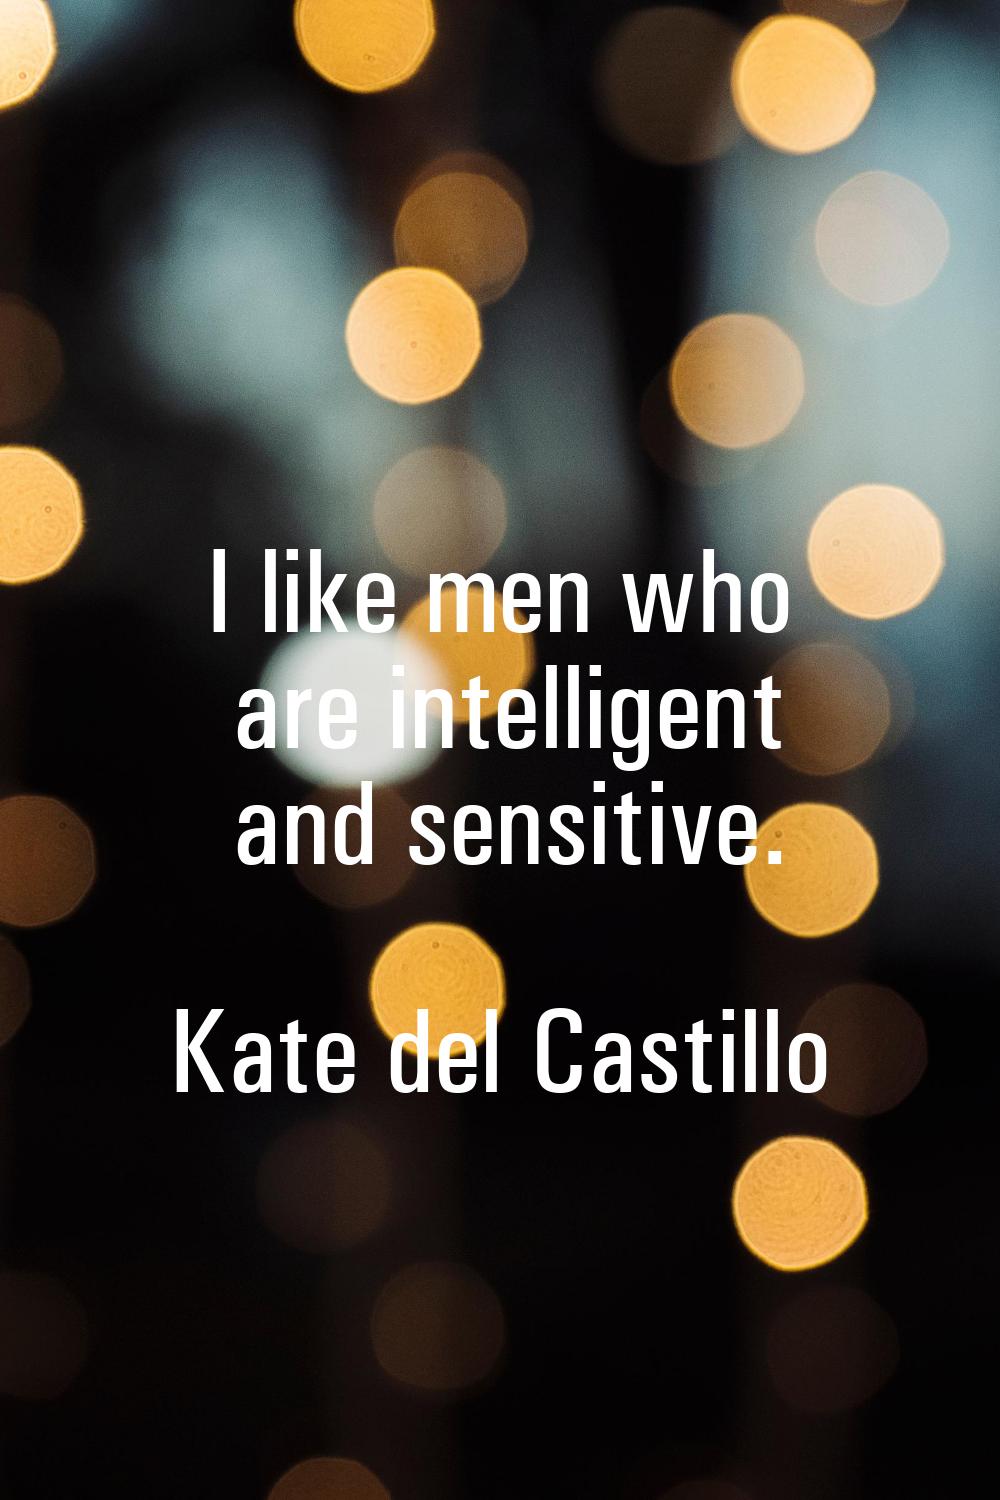 I like men who are intelligent and sensitive.